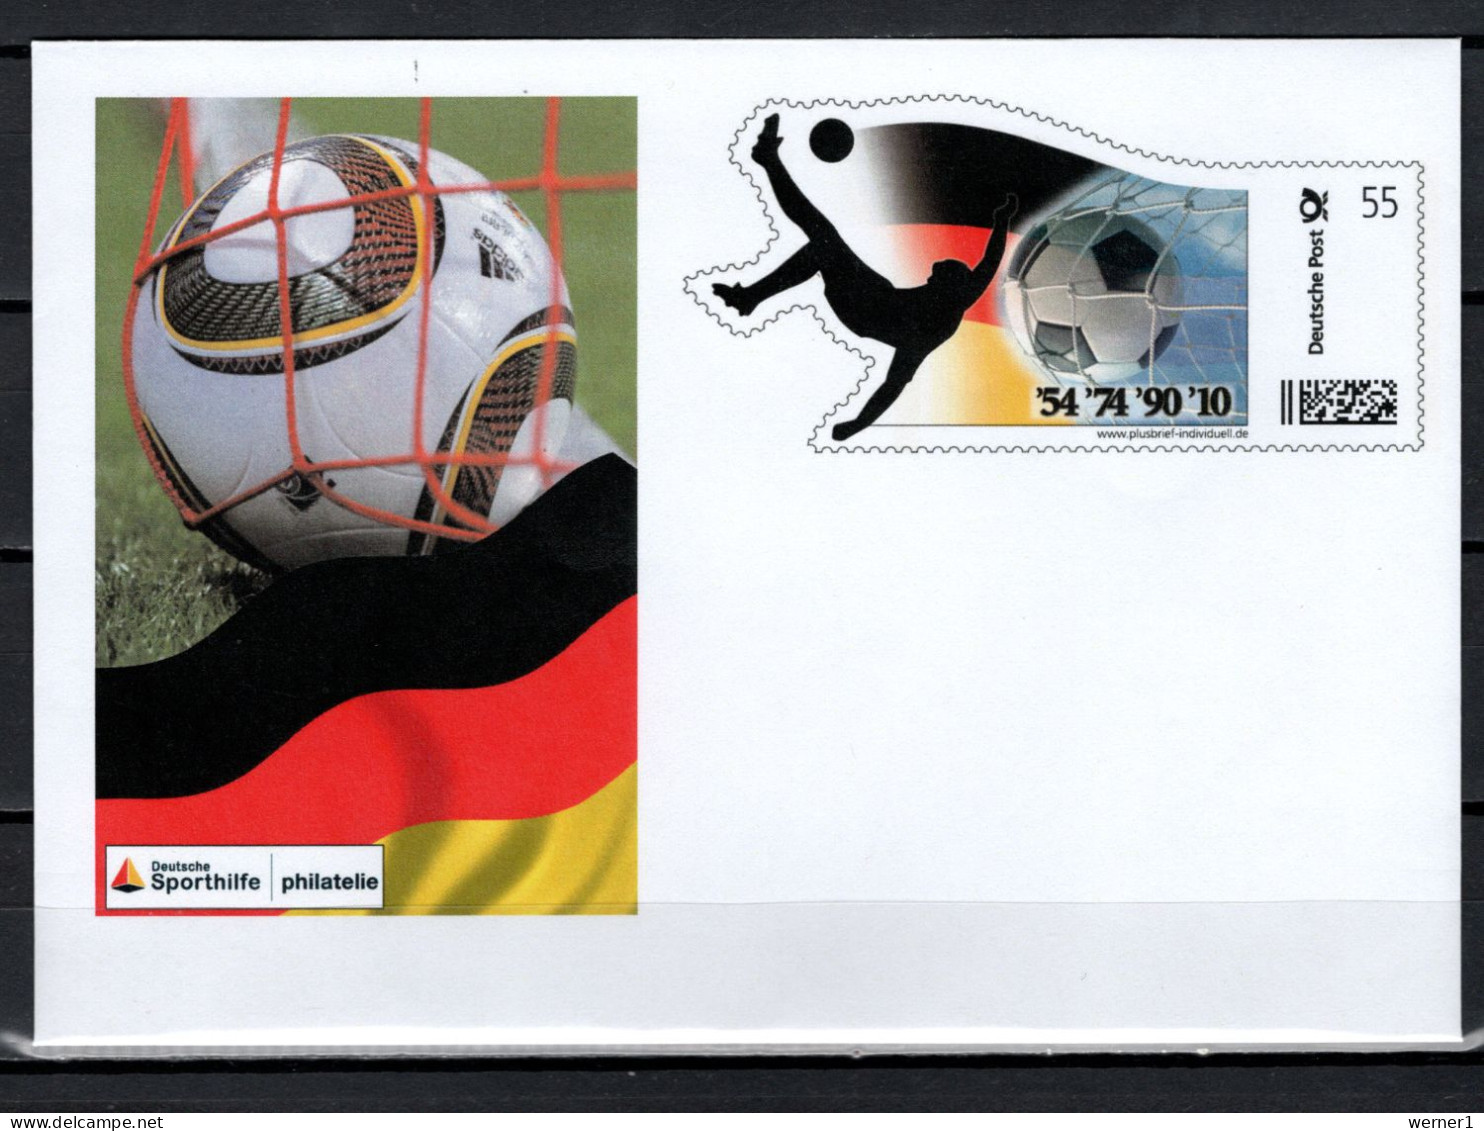 Germany 2010 Football Soccer World Cup Commemorative Cover - 2010 – South Africa